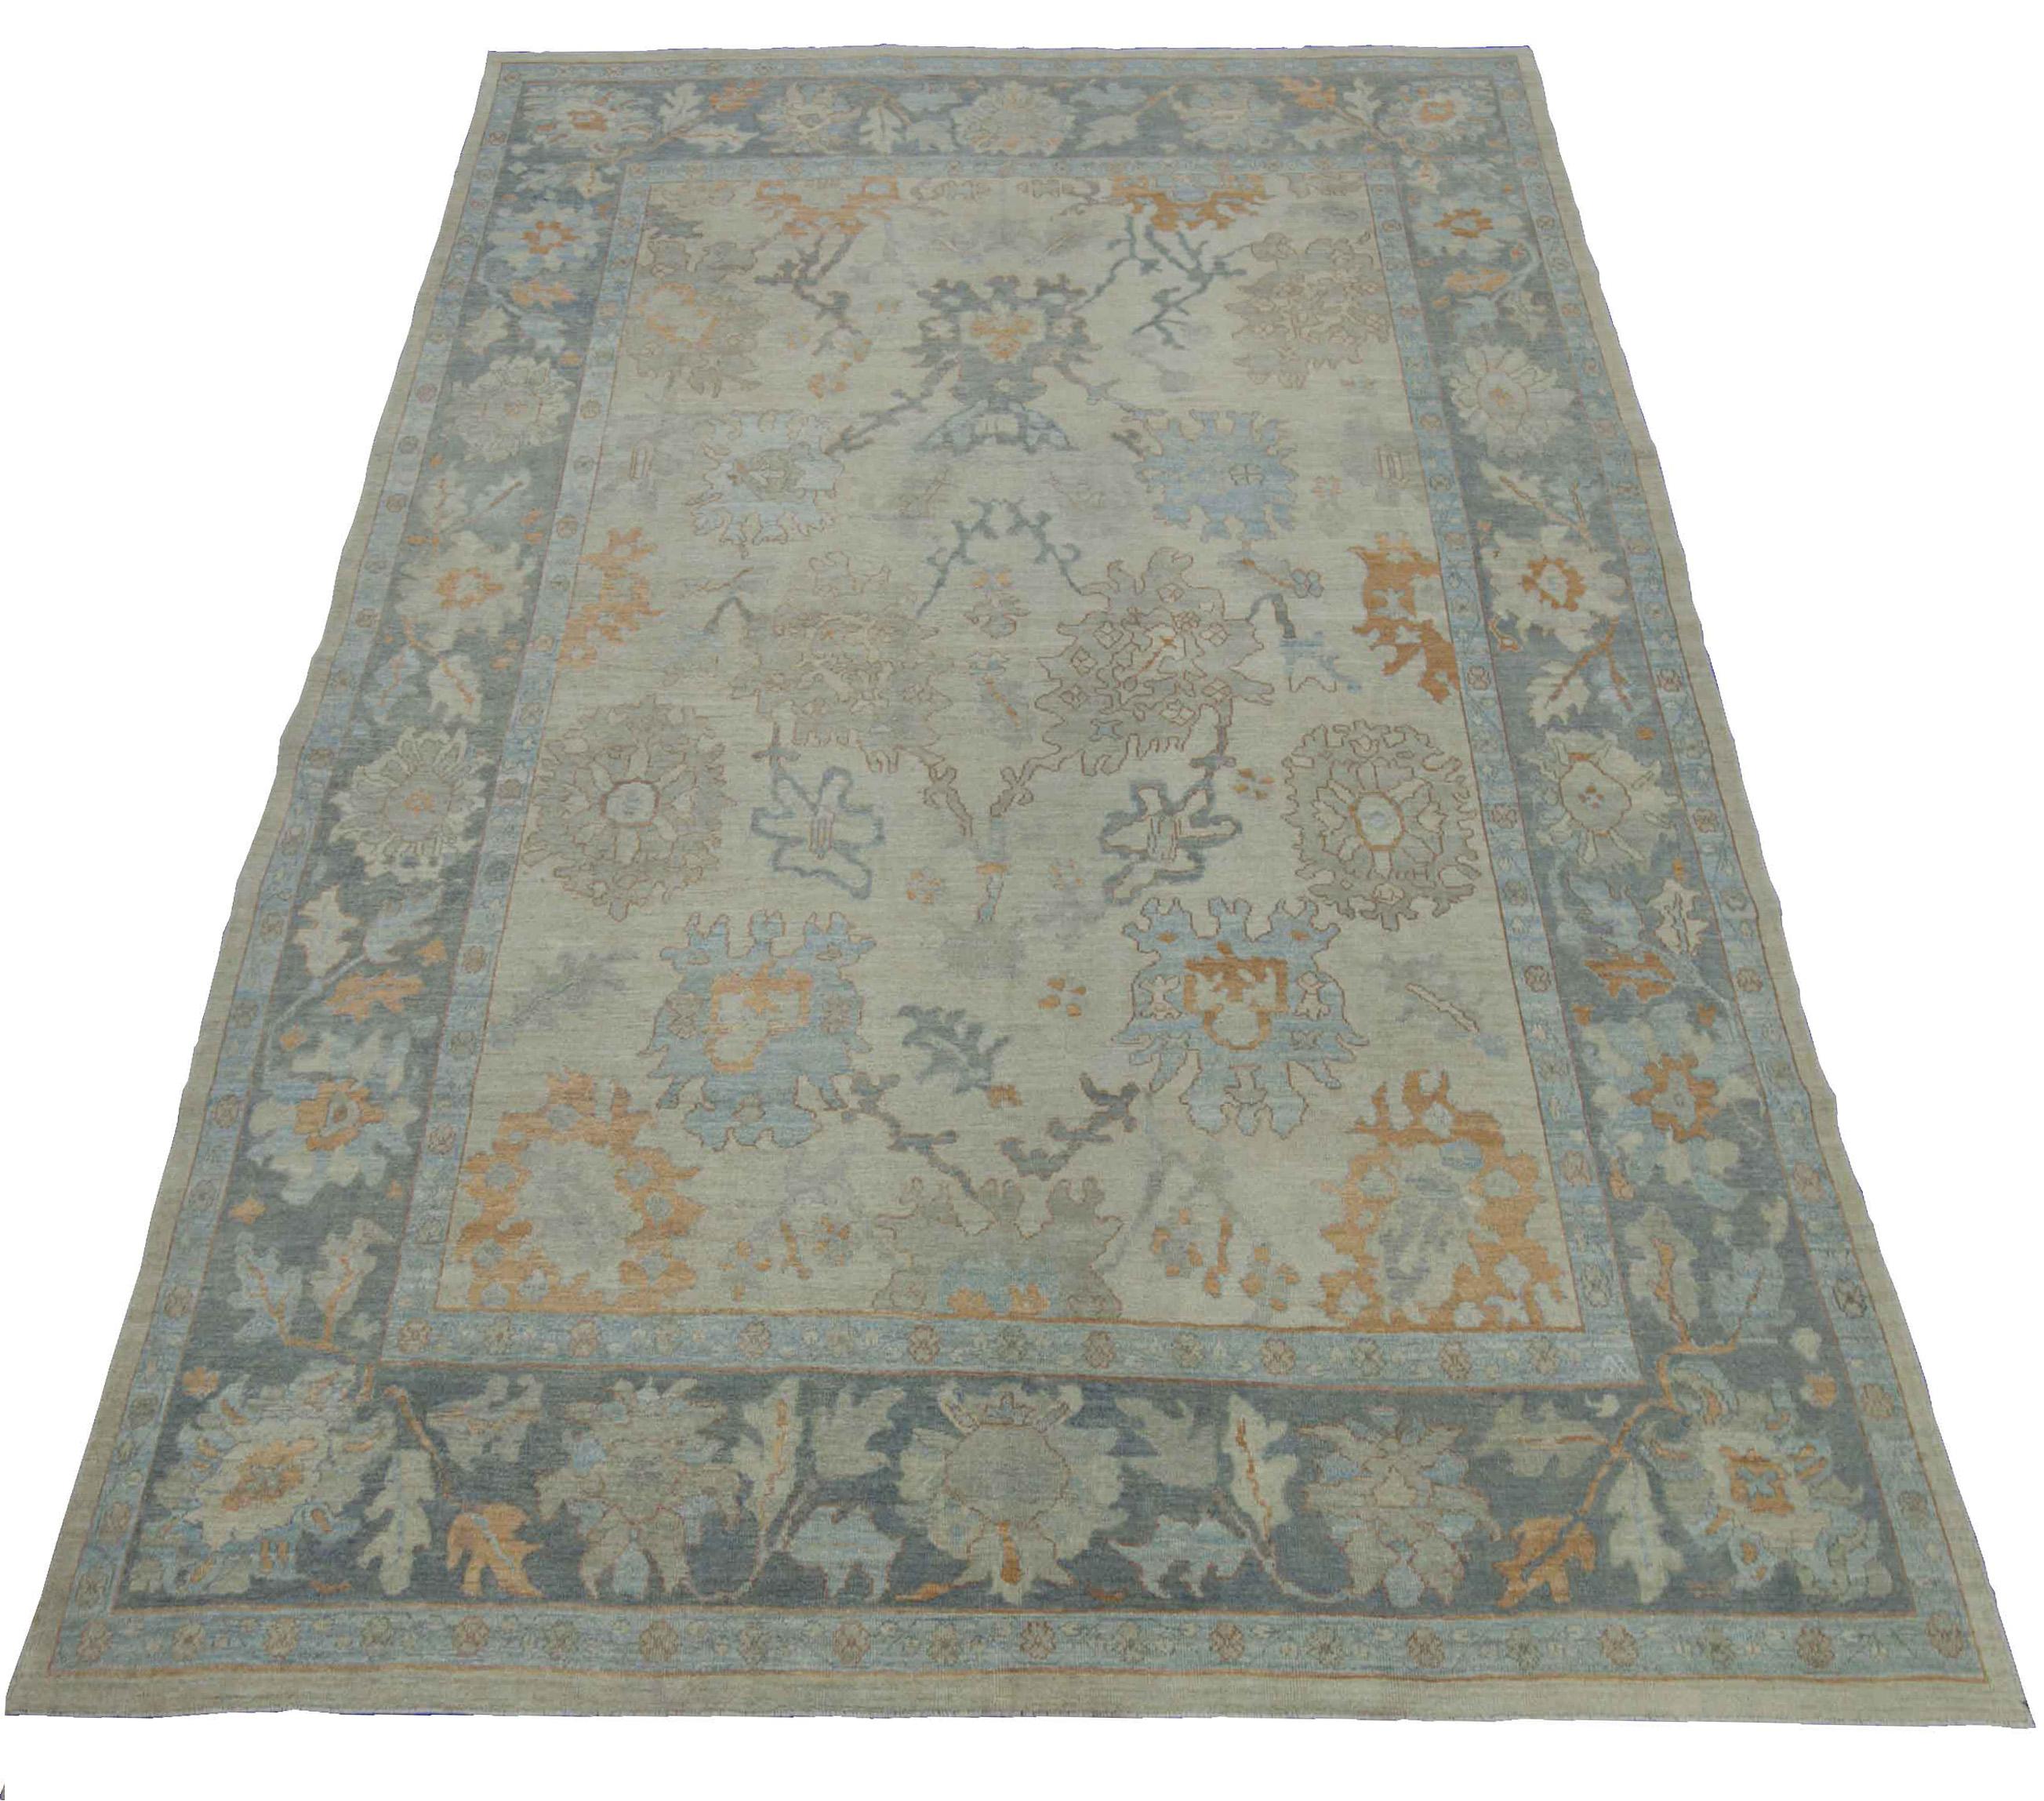 Modern Turkish rug made of handwoven sheep’s wool of the finest quality. It’s colored with organic vegetable dyes that are certified safe for humans and pets alike. It features a beige field and blue border with amazing floral patterns identified